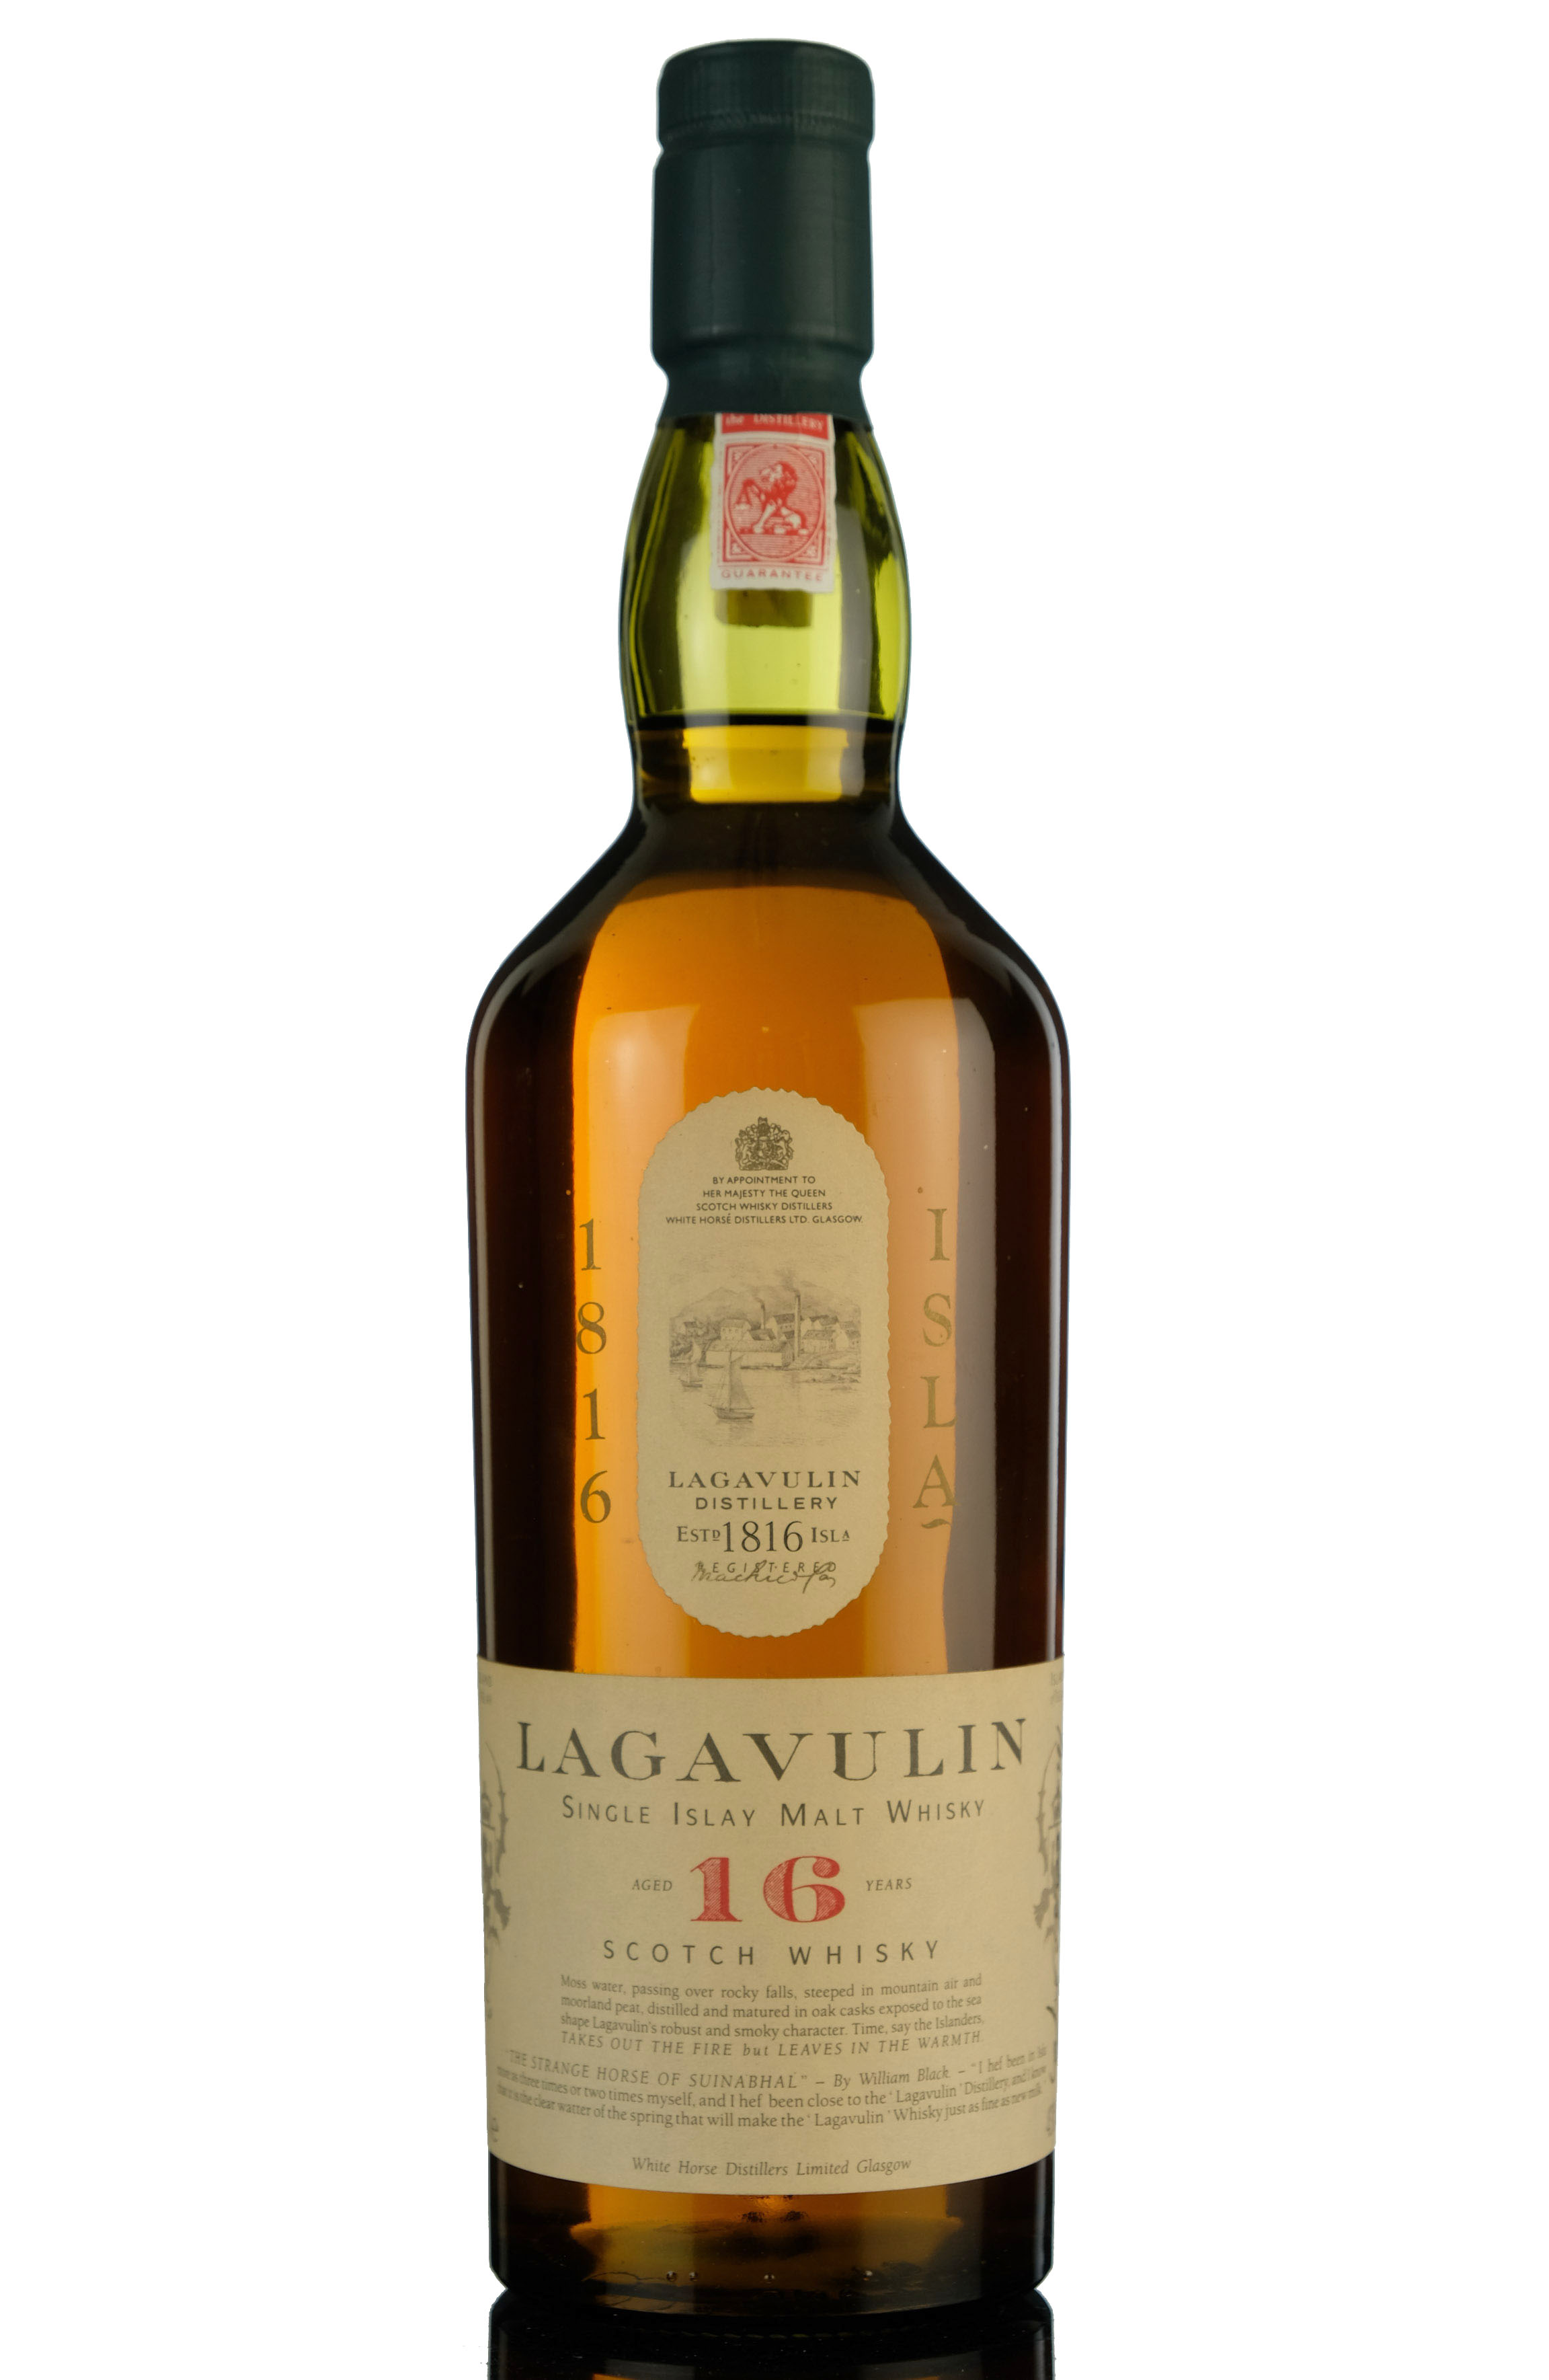 Lagavulin 16 Year Old - White Horse - Late 1980s